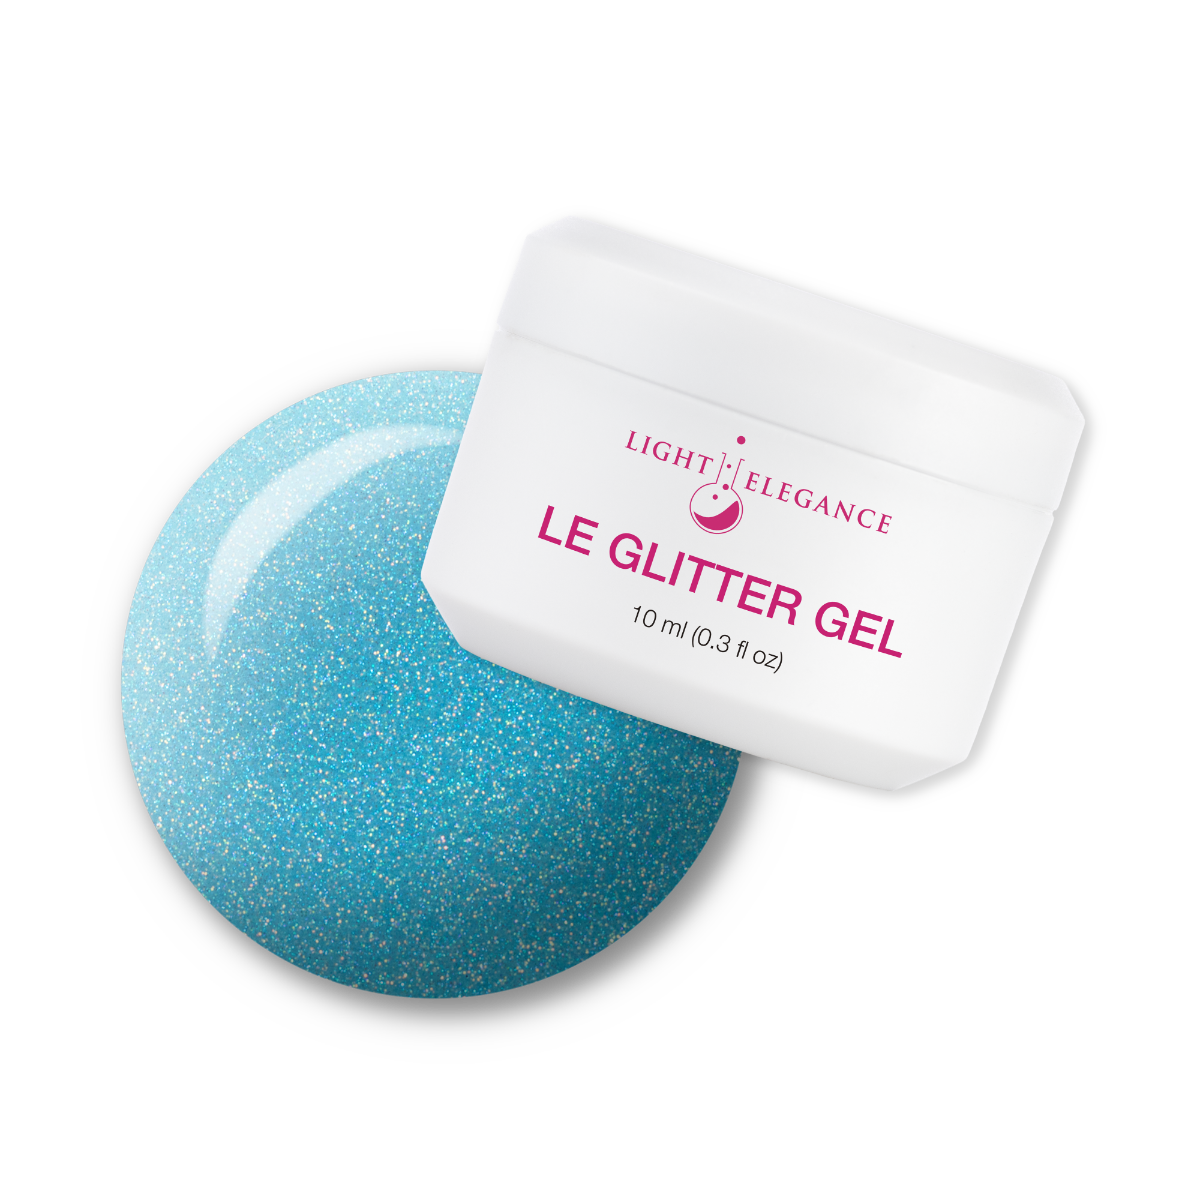 Light Elegance Glitter Gel - Stay Cool :: New Packaging - Creata Beauty - Professional Beauty Products